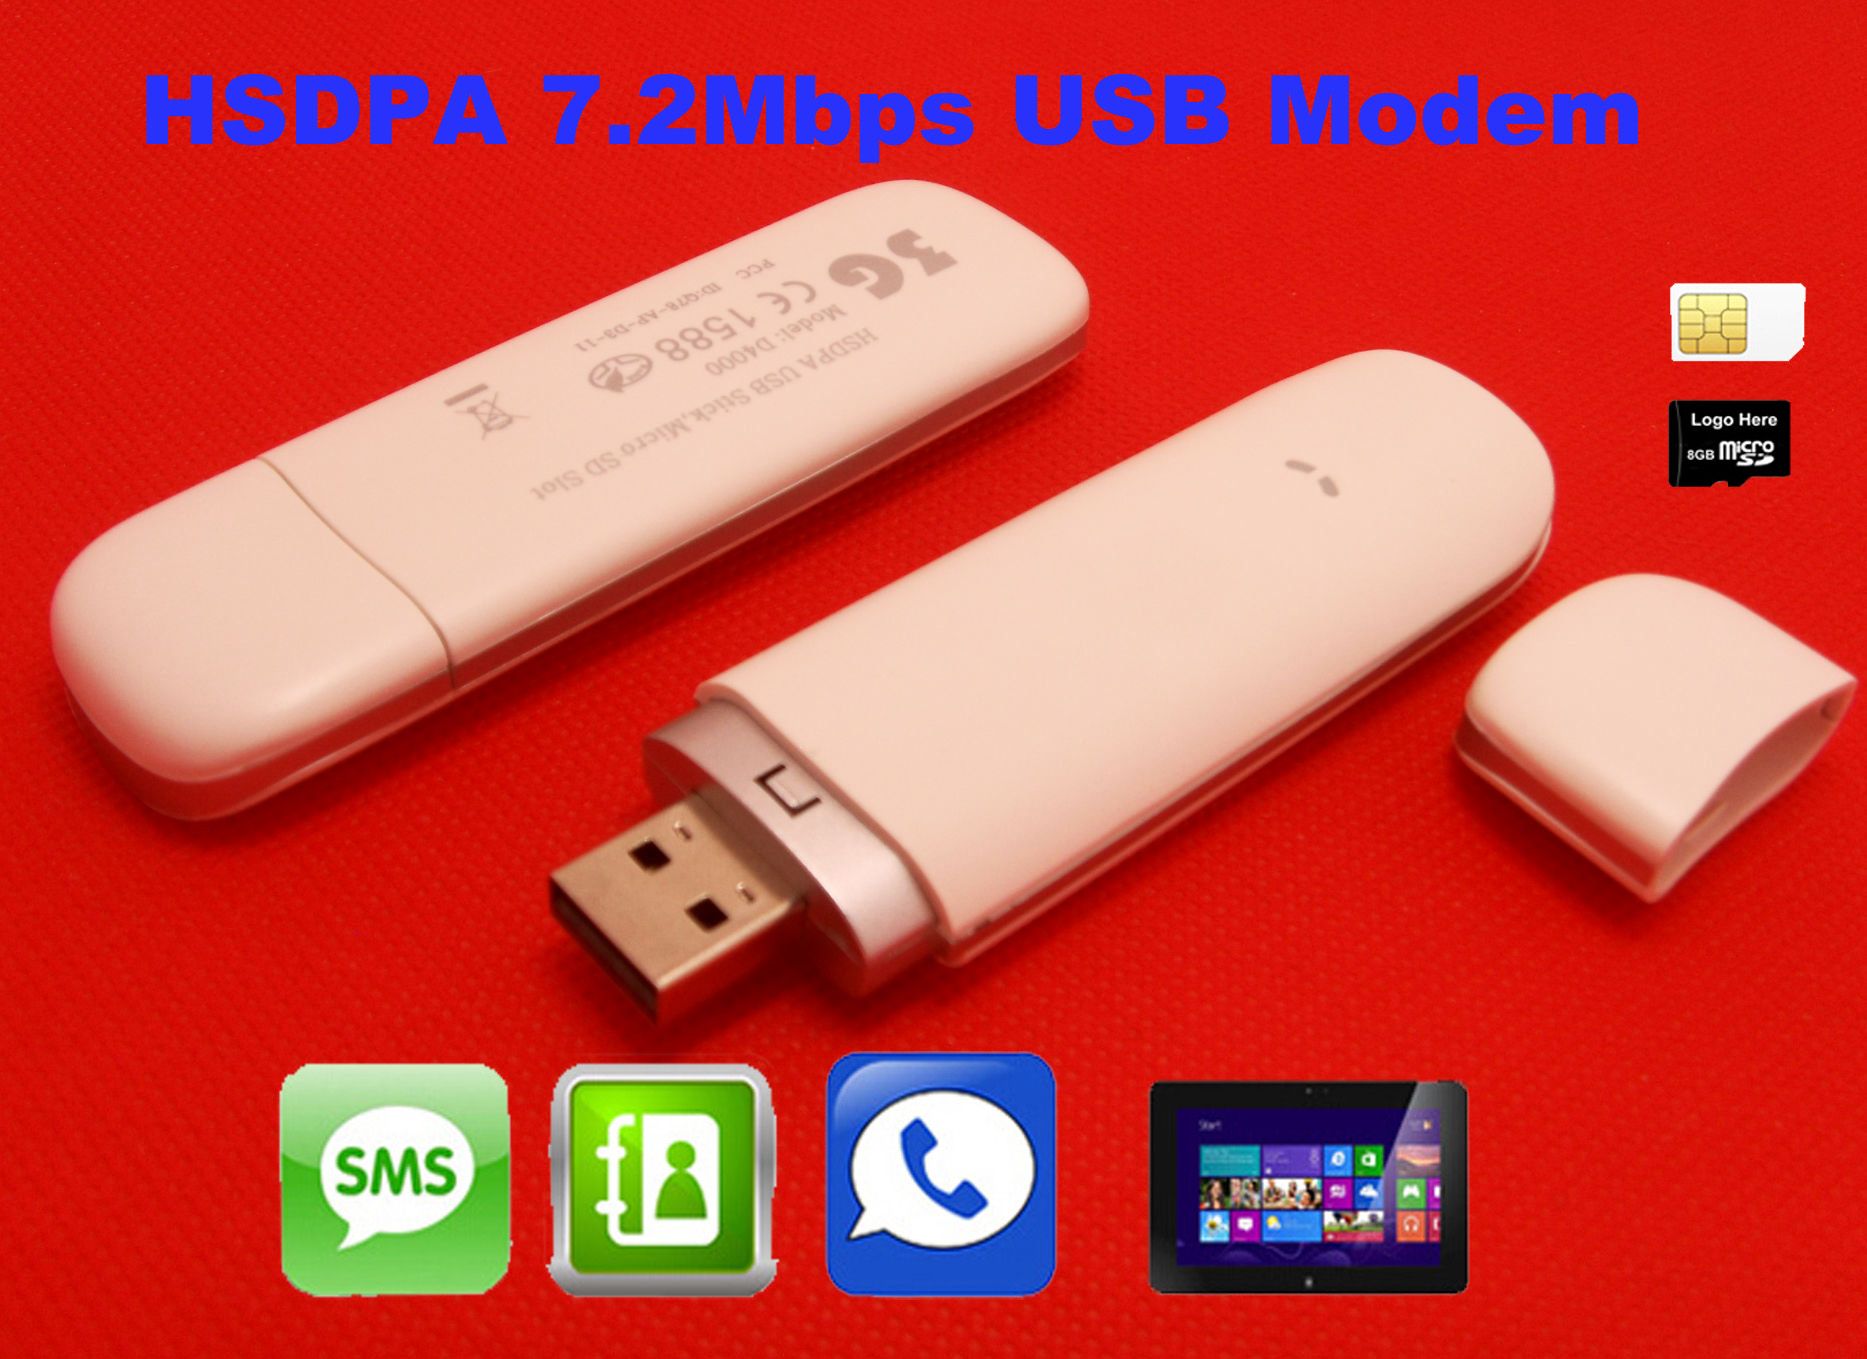 Anniv Coupon Below] 7.2MBPS Driver HSDPA USB MODEM 2100MHZ TF 3G Dongle Support Sim SLOT For Windows 8 Android Tablet Pc From Saffronflowerseed, $10.06 | DHgate.Com